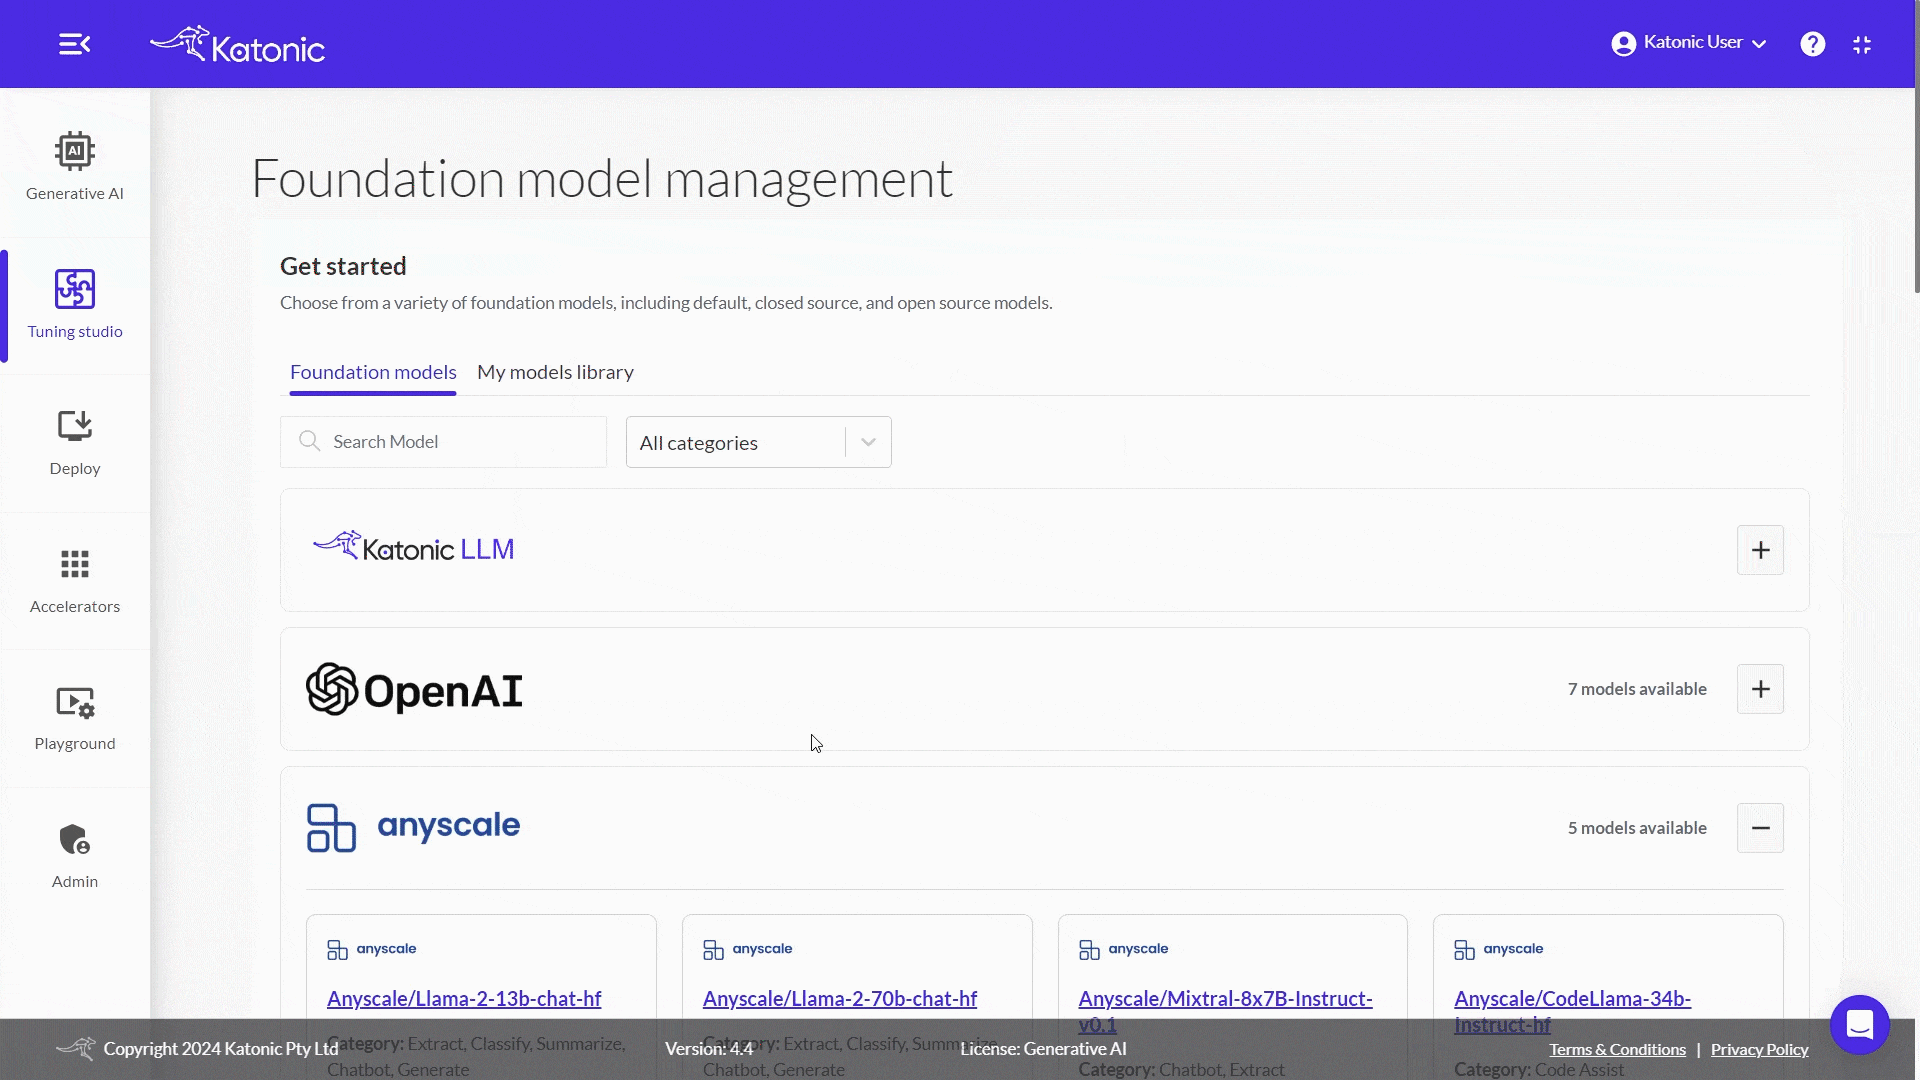 Manage models in Katonic AI: select from default, open source, or closed source options like Katonic LLM, OpenAI, Anyscale.